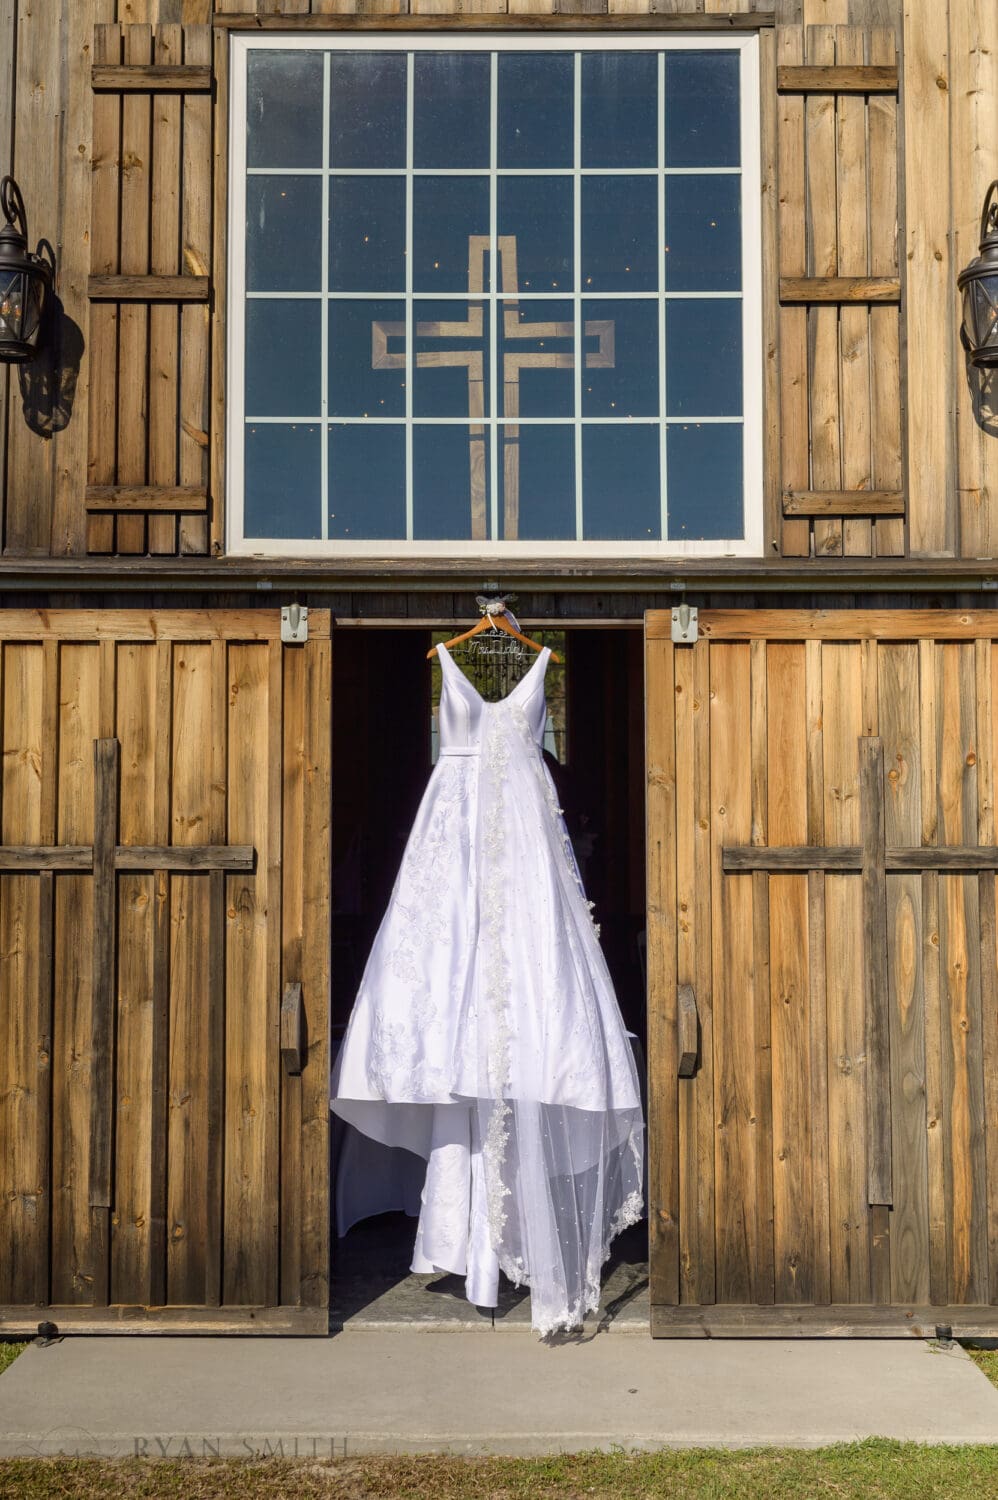 Dress hanging in front of the barn - The Blessed Barn